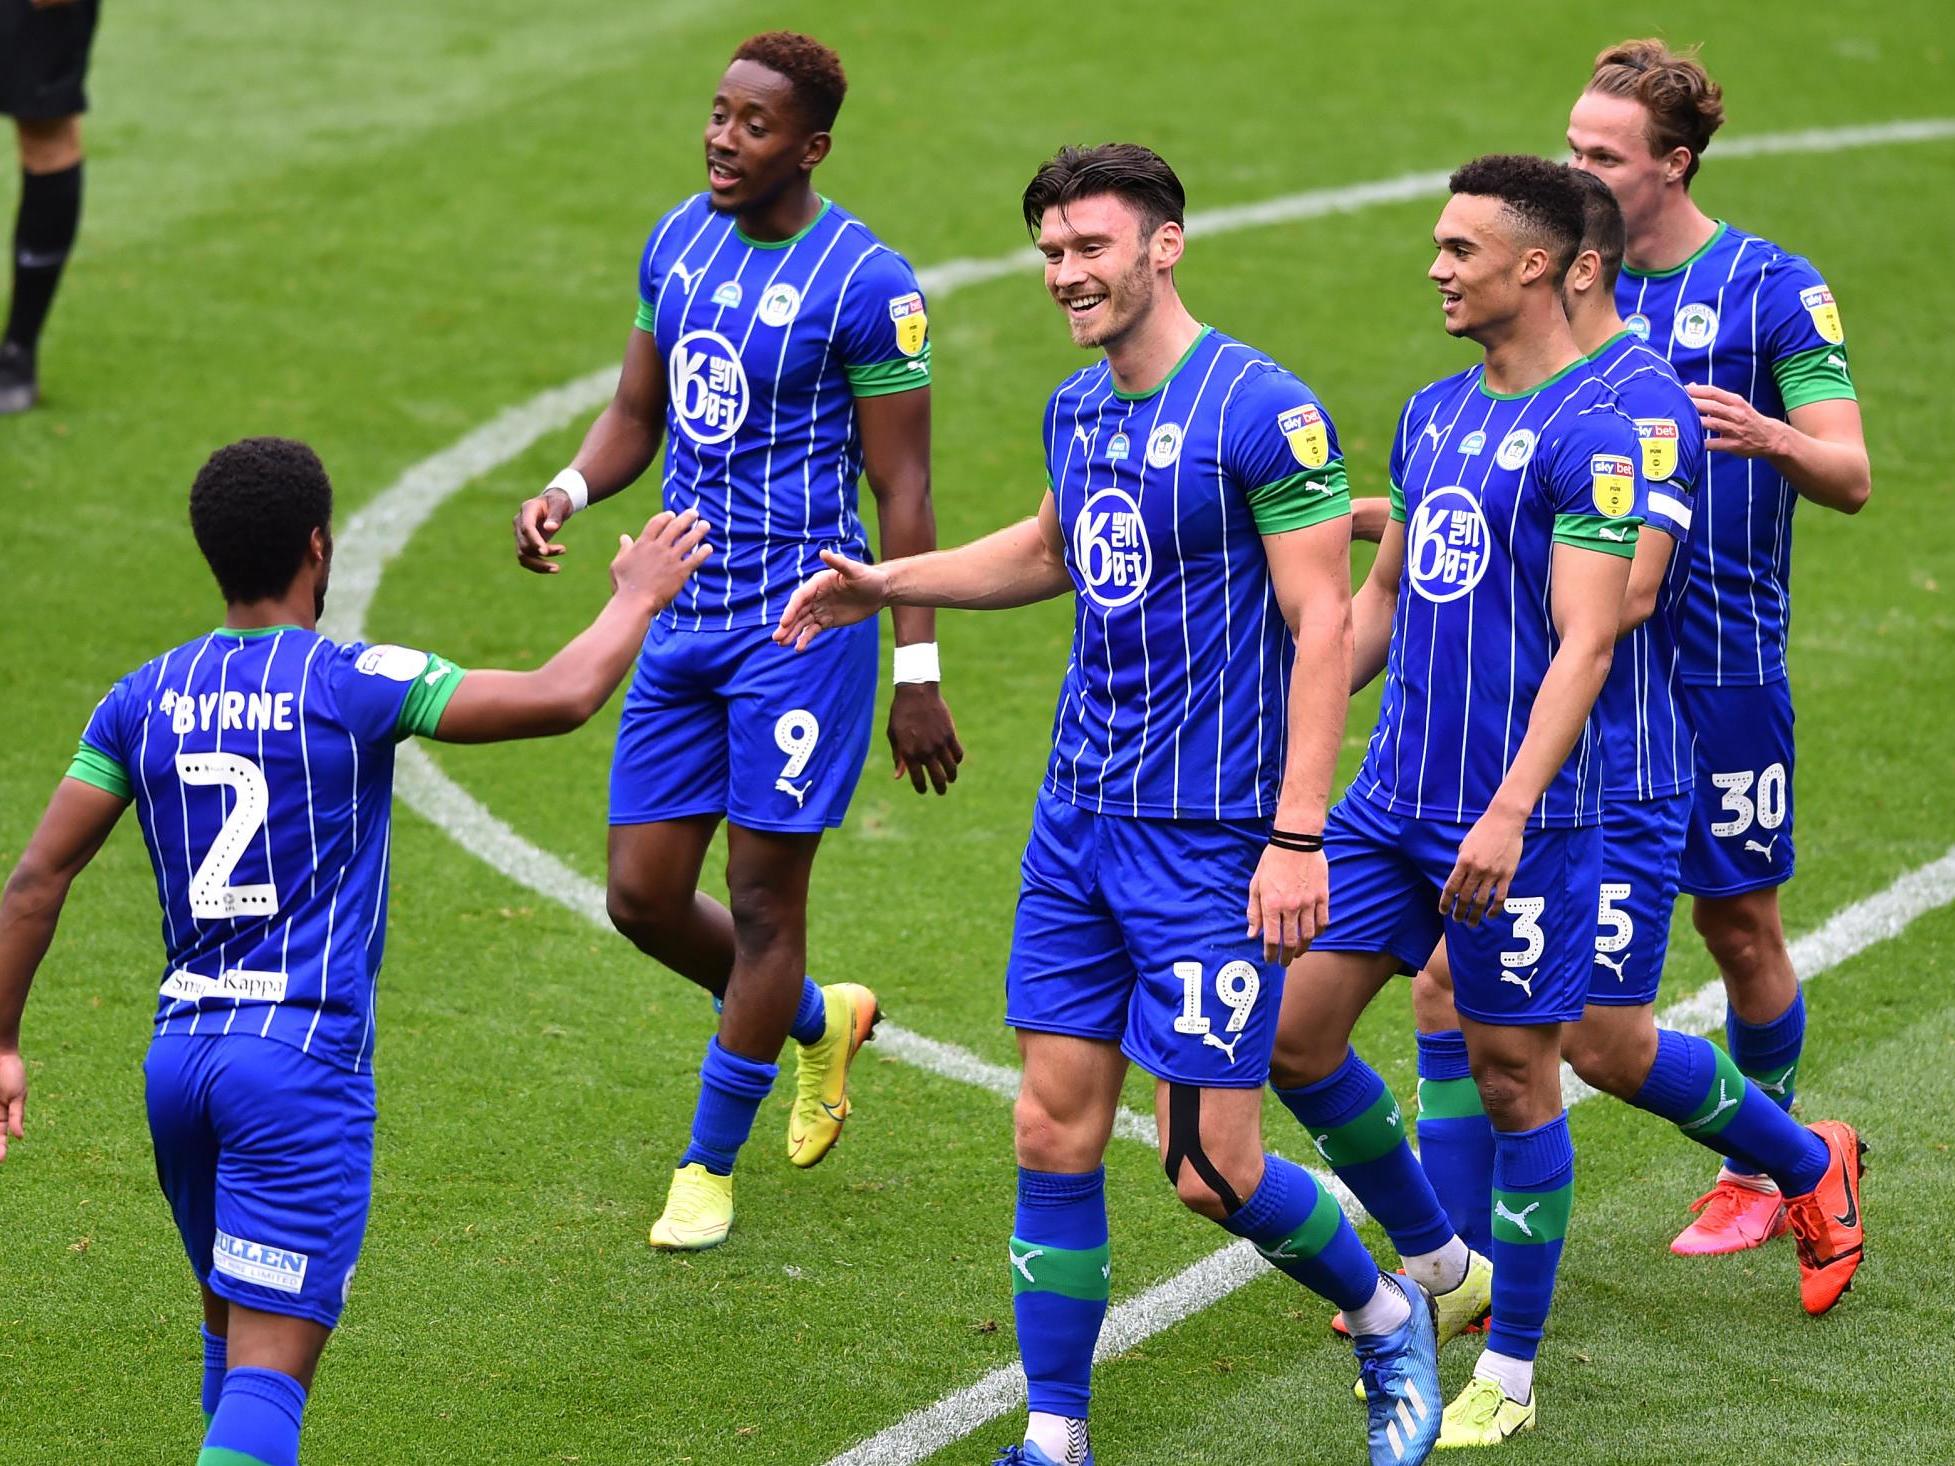 Wigan's players are battling relegation from the Championship